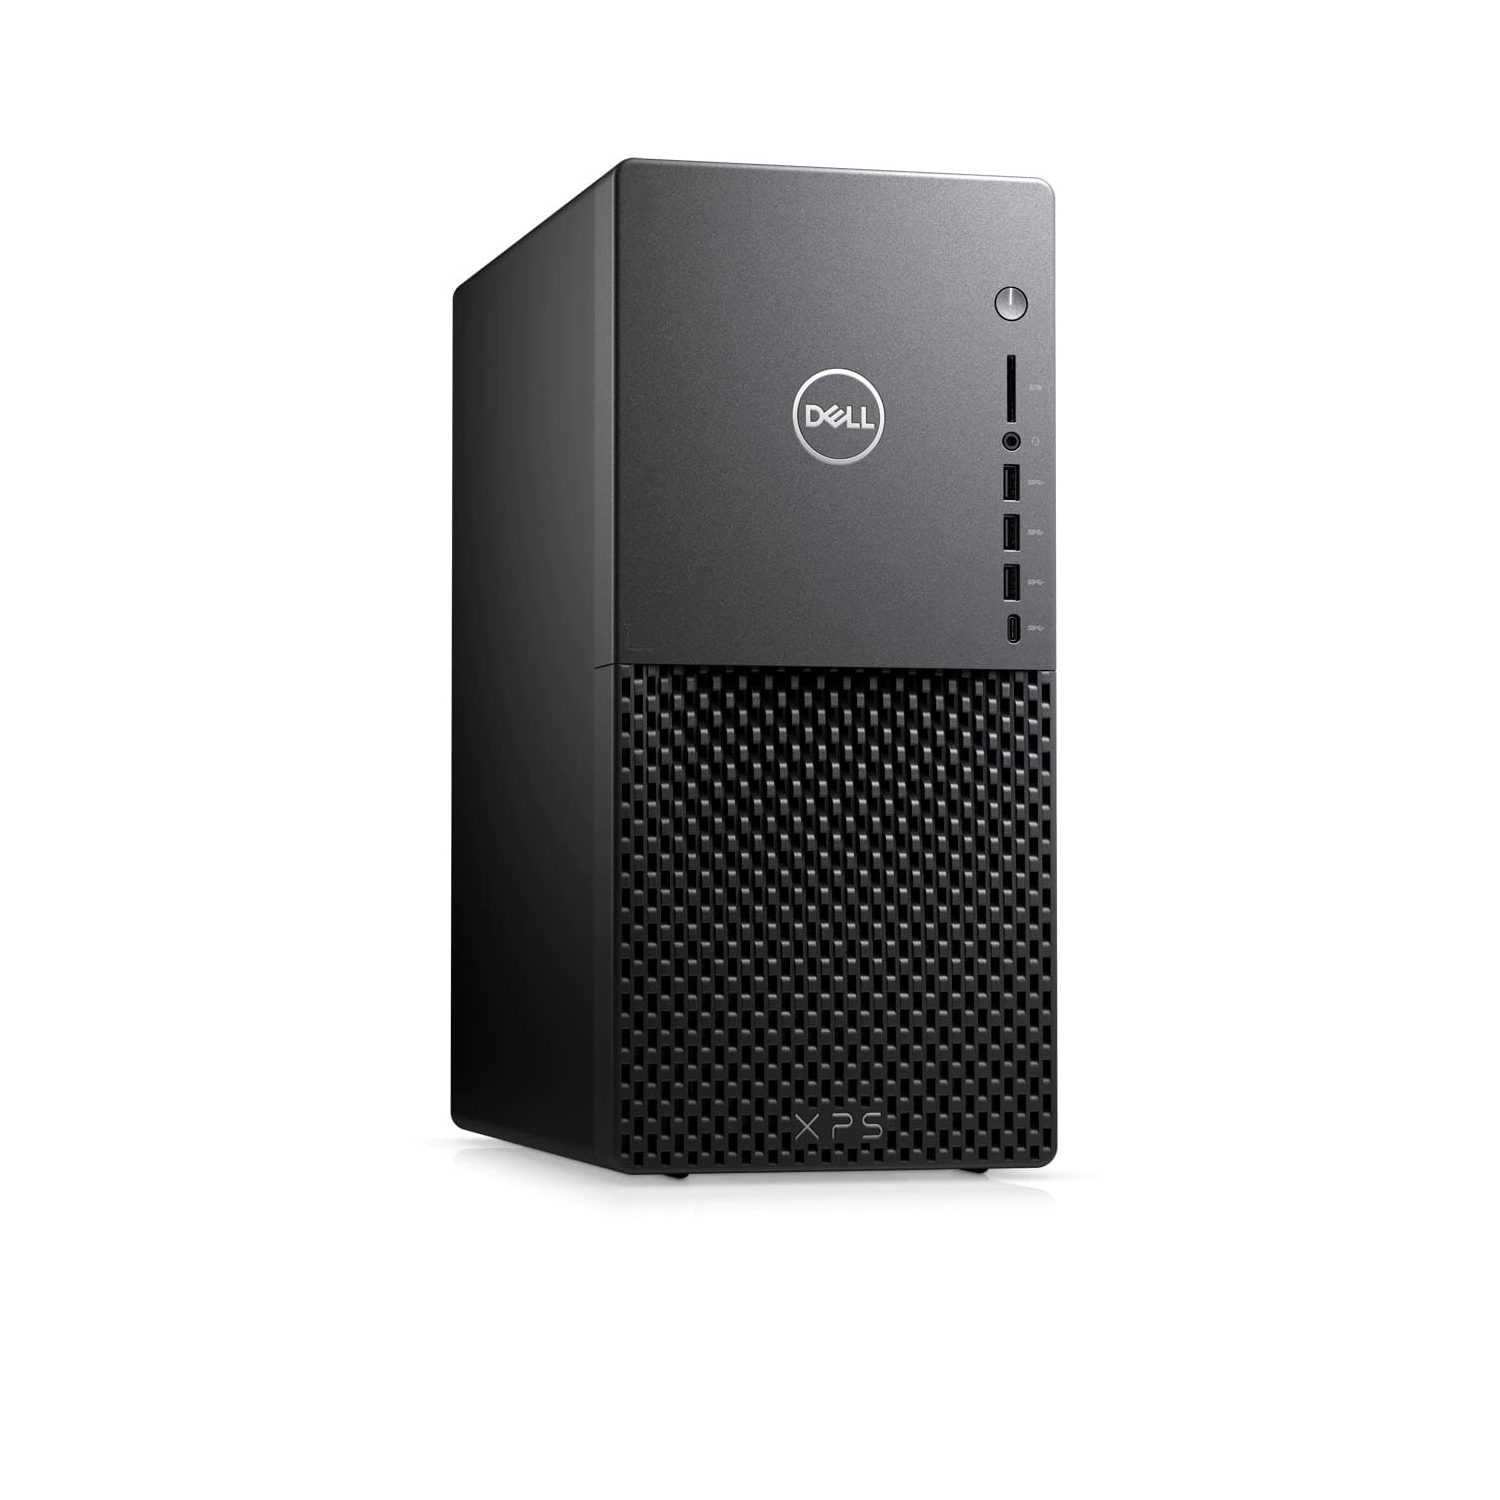 Refurbished (Excellent) - Dell XPS 8940 Desktop (2020) | Core i7 - 1TB HDD + 512GB SSD - 16GB RAM - 3060 Ti | 8 Cores @ 4.9 GHz - 11th Gen CPU Certified Refurbished